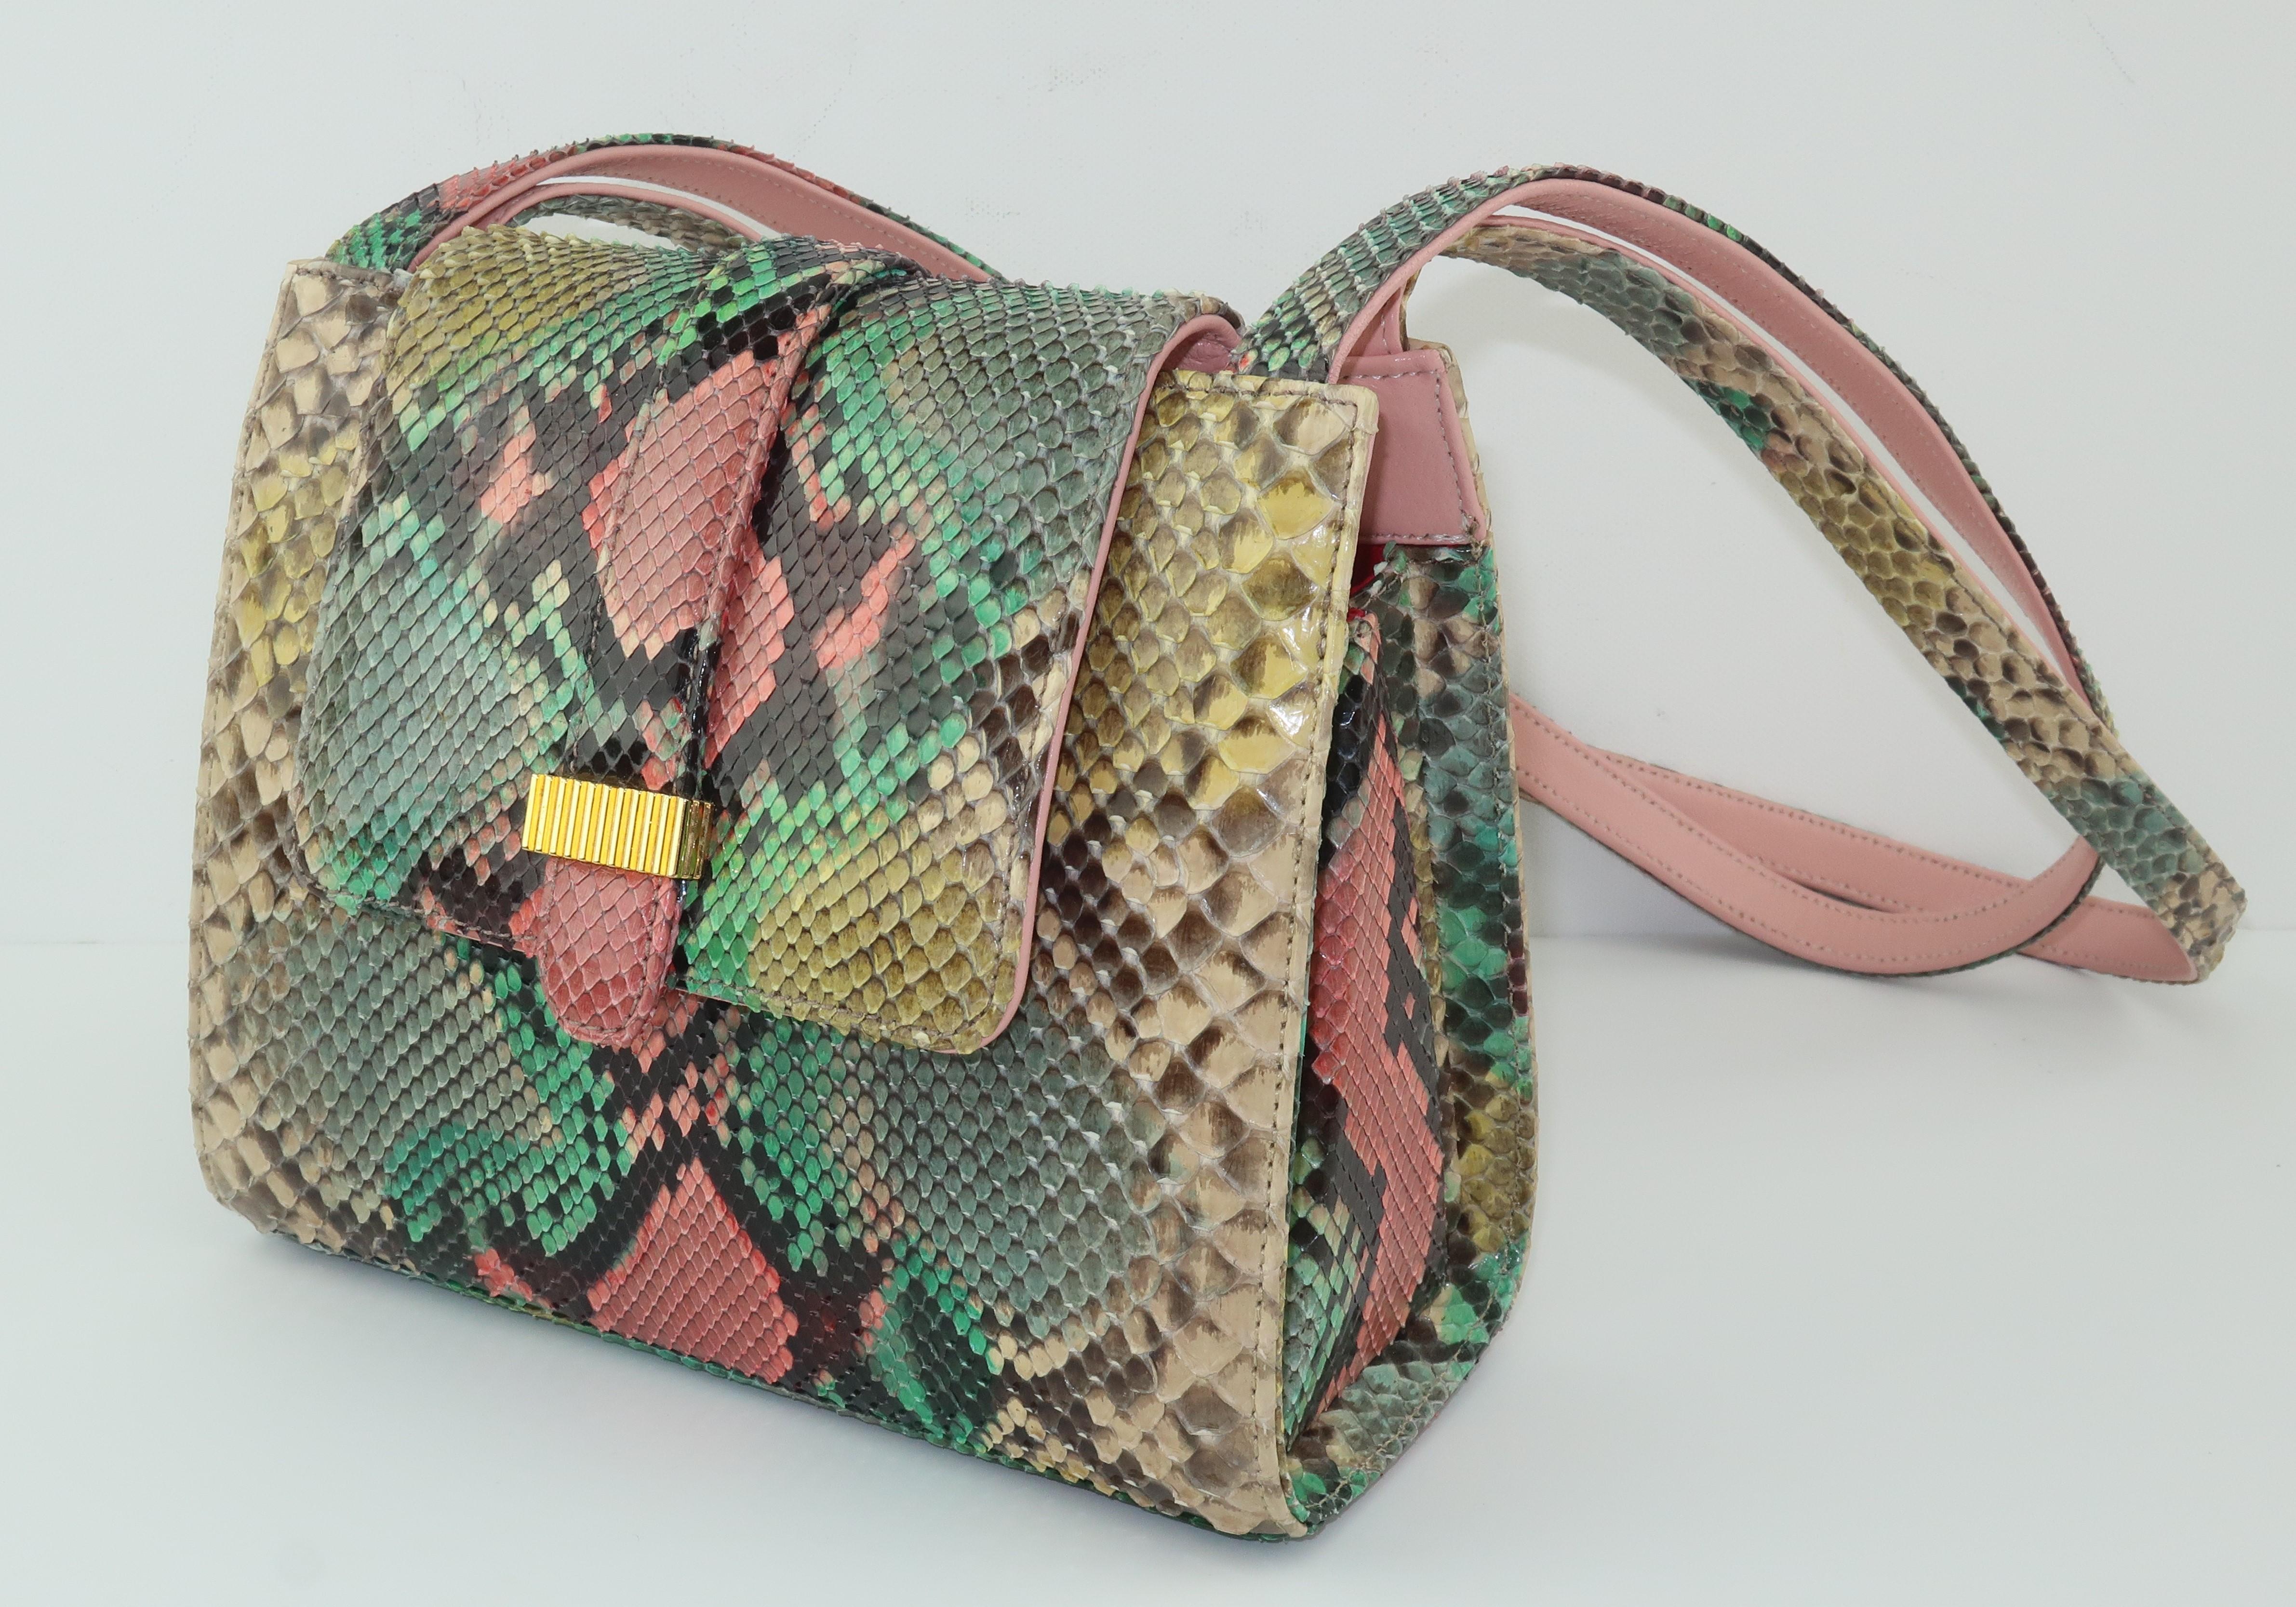 Nothing like a candy colored python handbag to brighten up your day!  Especially when it comes from the designers at Kleinberg Sherrill (now doing business as W. Kleinberg) specialists in luxury goods fabricated from exotic skins since the 1980’s. 